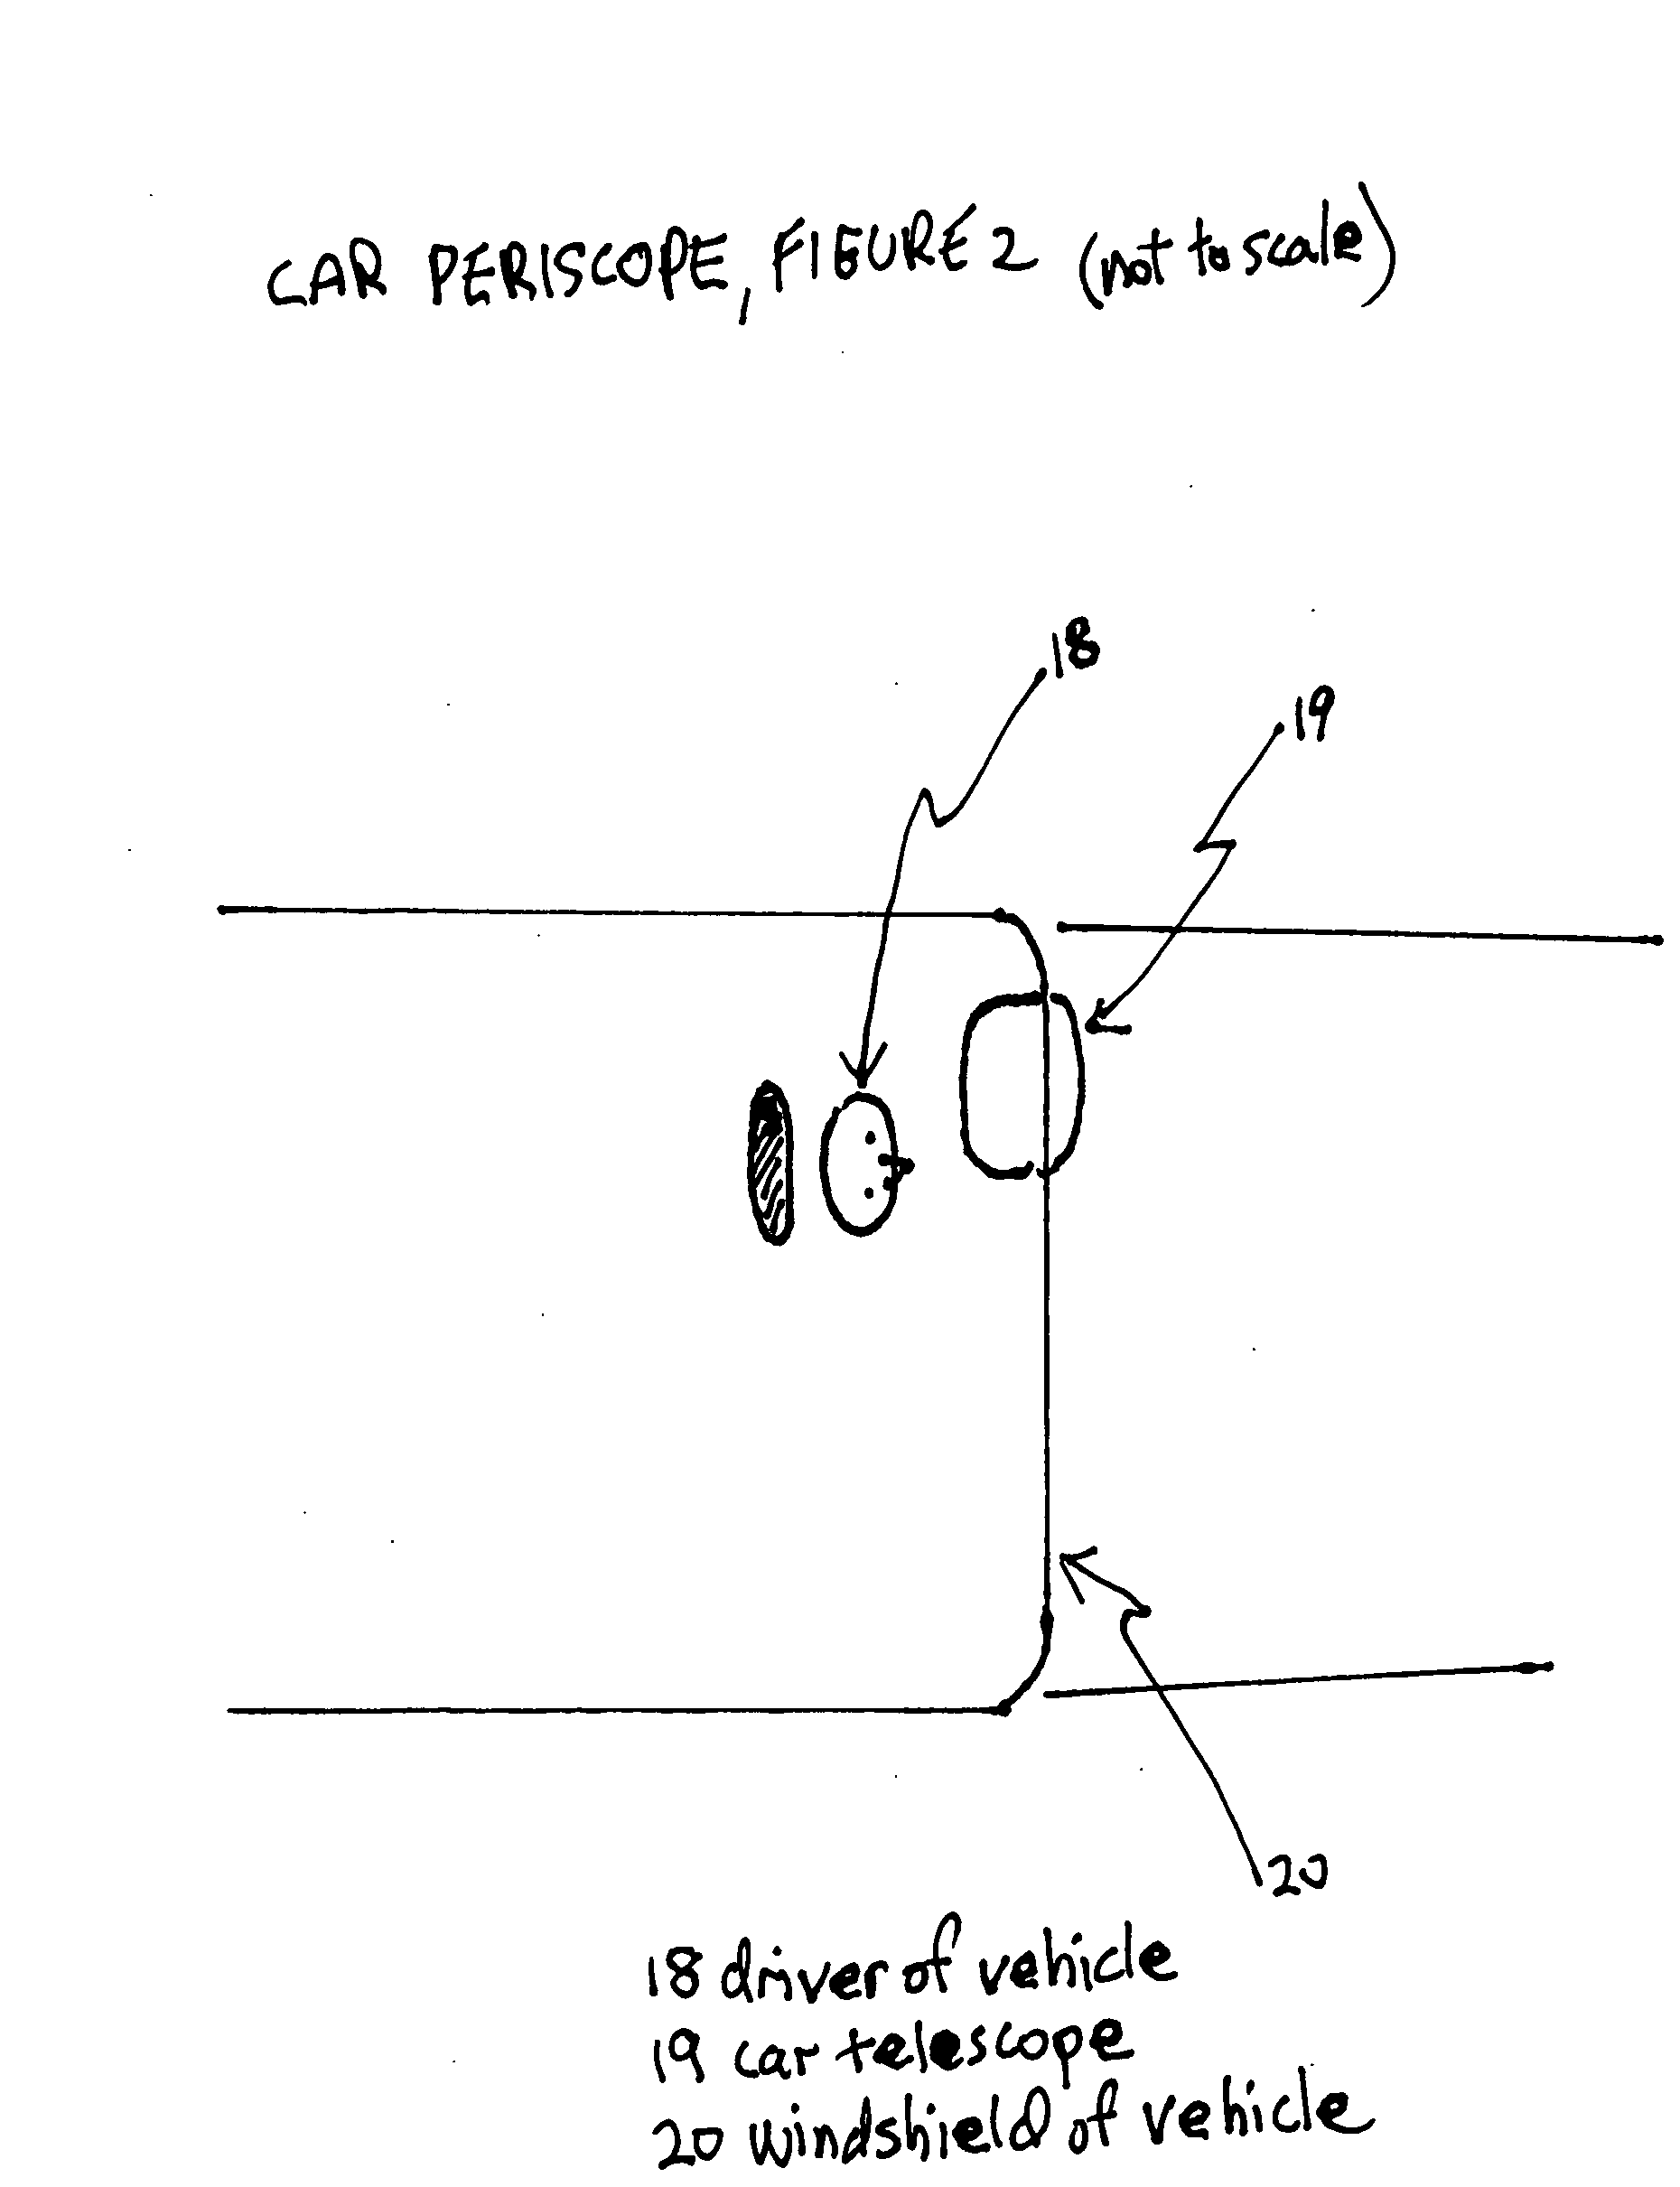 Apparatus to enable an automobile driver to see above oversized vehicles and other obstacles